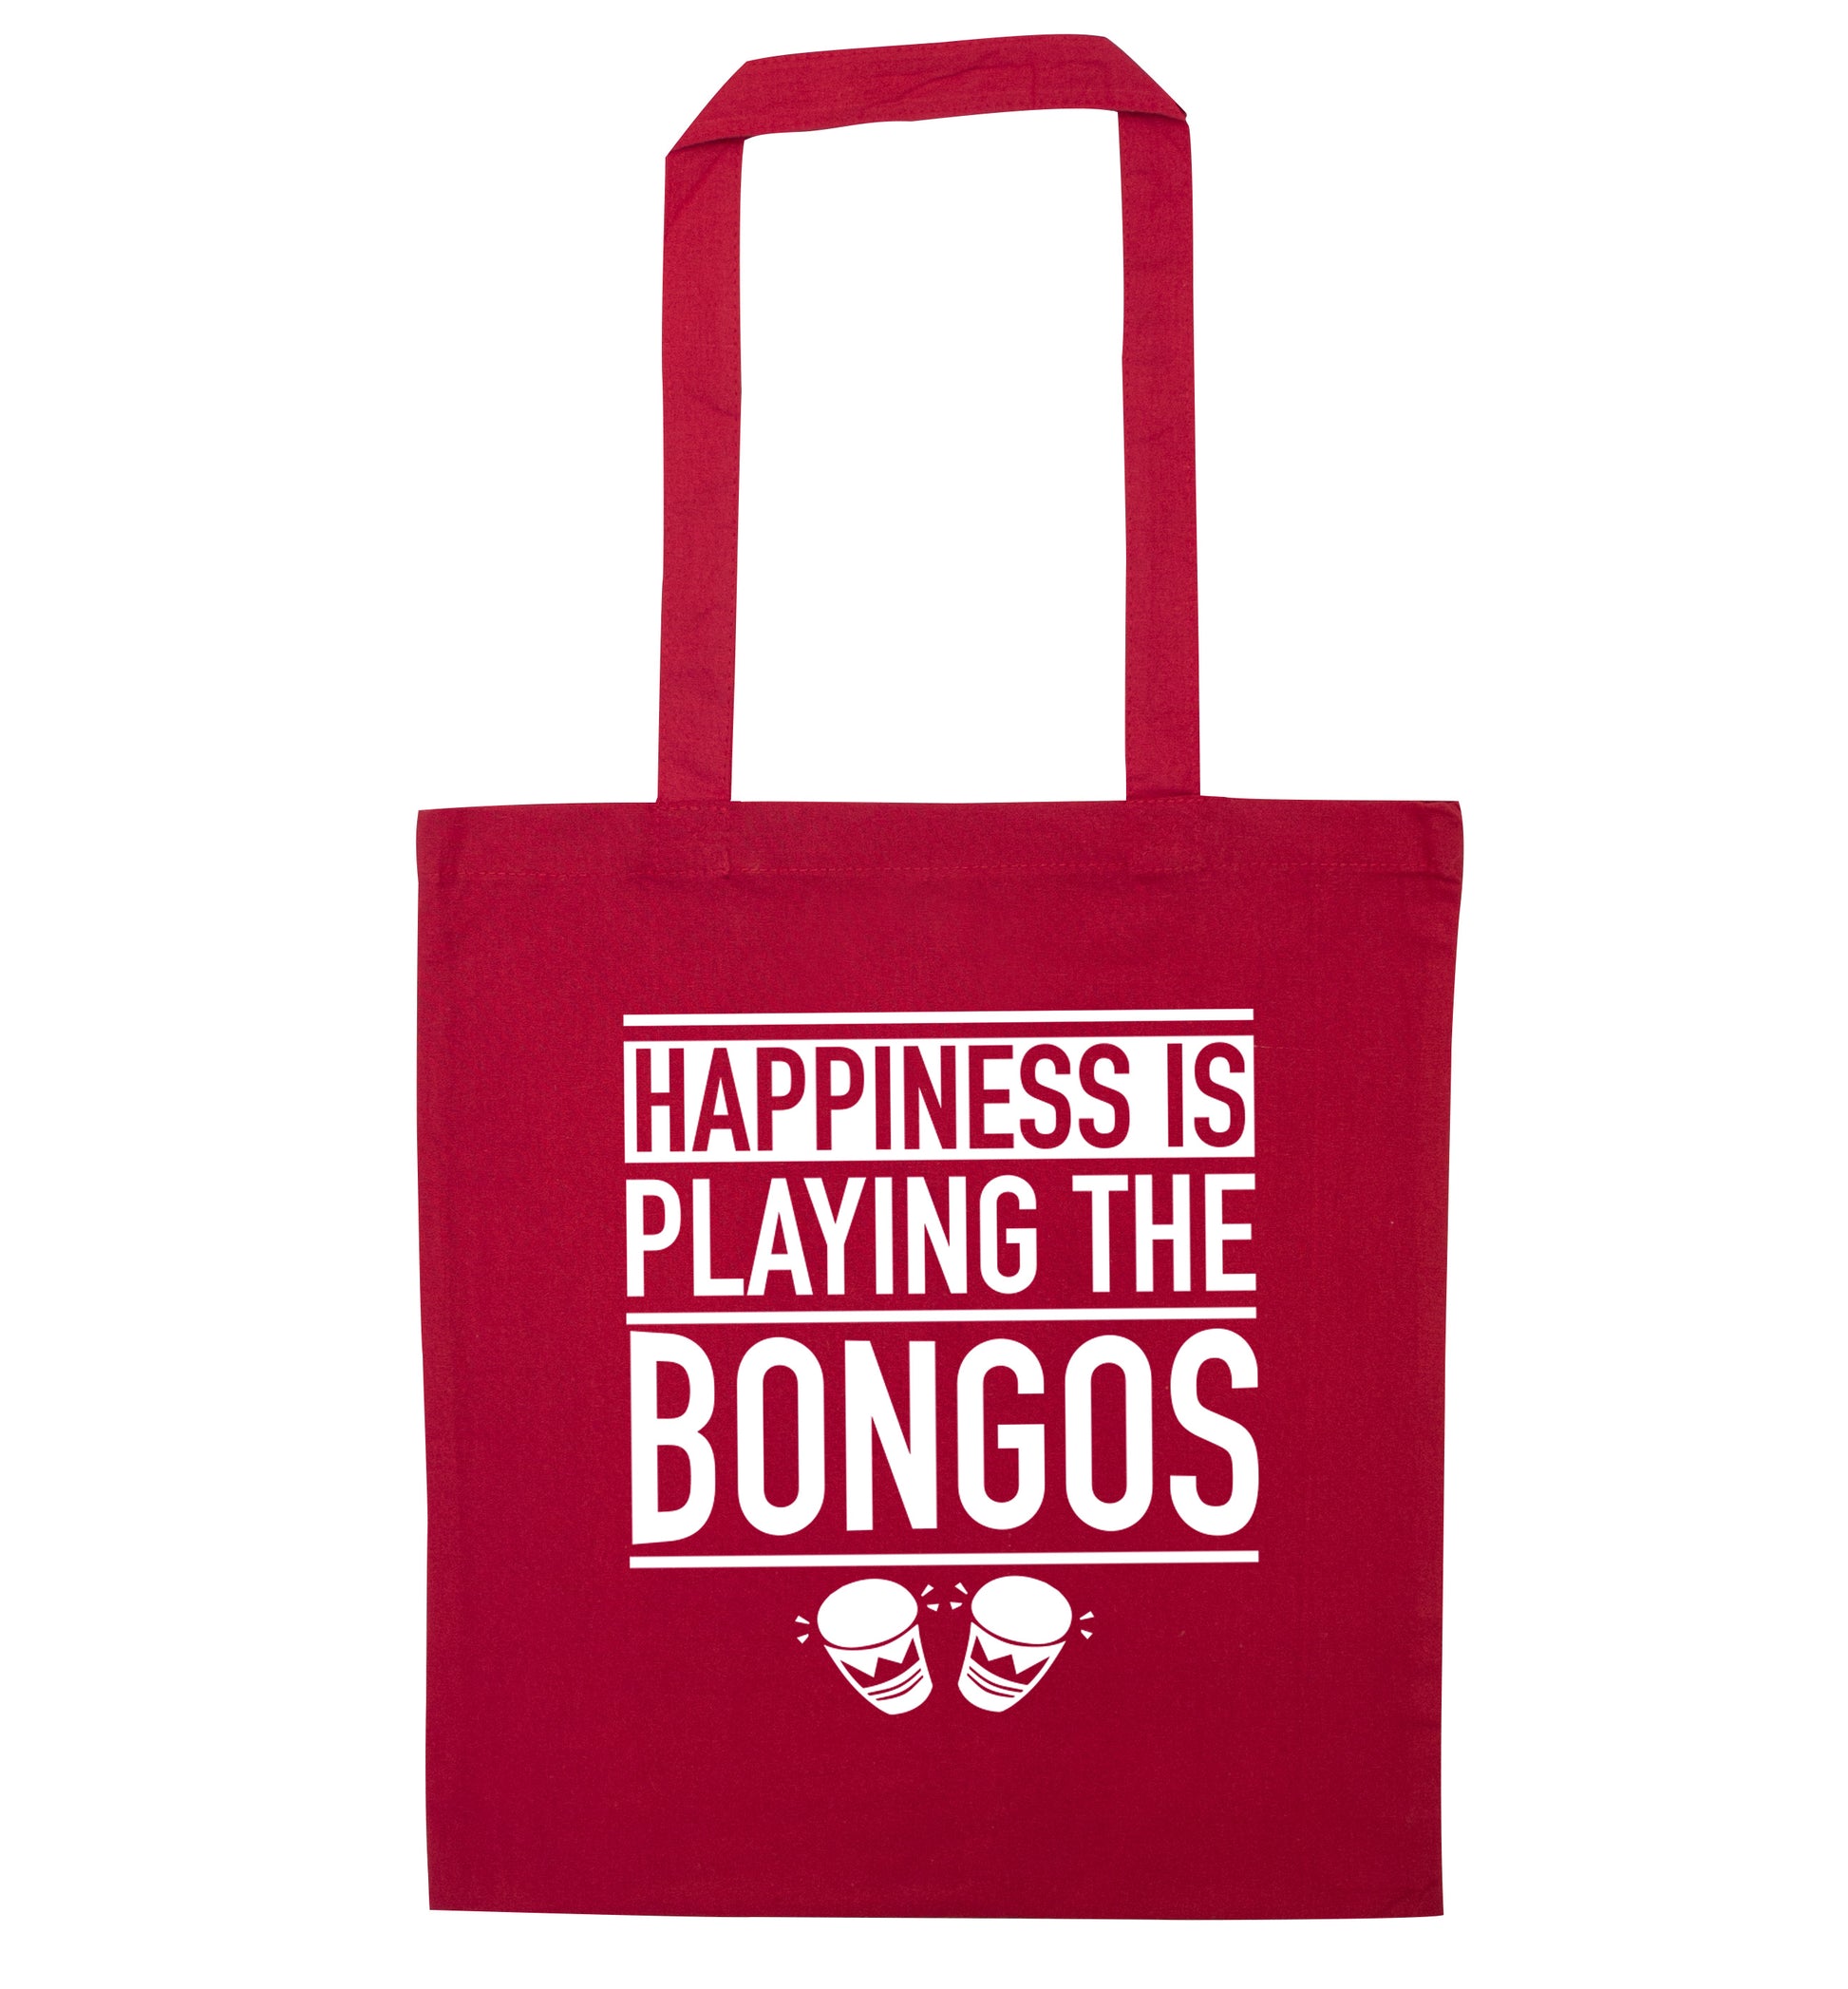 Happiness is playing the bongos red tote bag